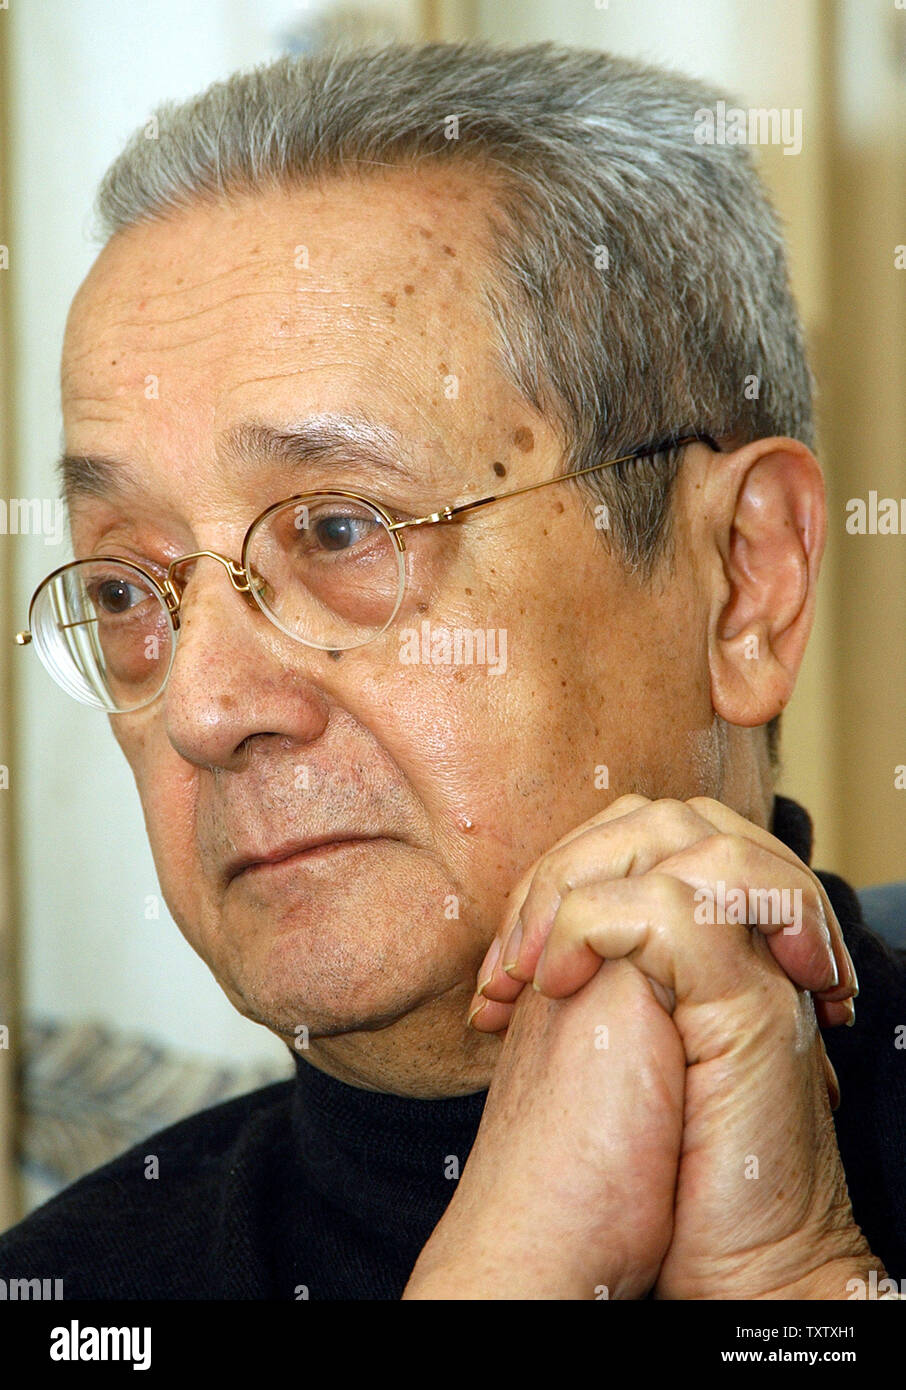 French lawyer Jacques Verges, in a file photo from Amman, Jordan, December 18, 2003, said on March 27, 2004, that Saddam Hussein's nephew had chosen him to represent Saddam Hussein in his upcoming war crimes tria. Verges is known for defending Nazi war criminal Klaus Barbie and guerrilla Carlos the Jackal and is presently defending former Iraqi deputy Prime Minister Tariq Aziz. (UPI Photo/Debbie Hill) Stock Photo